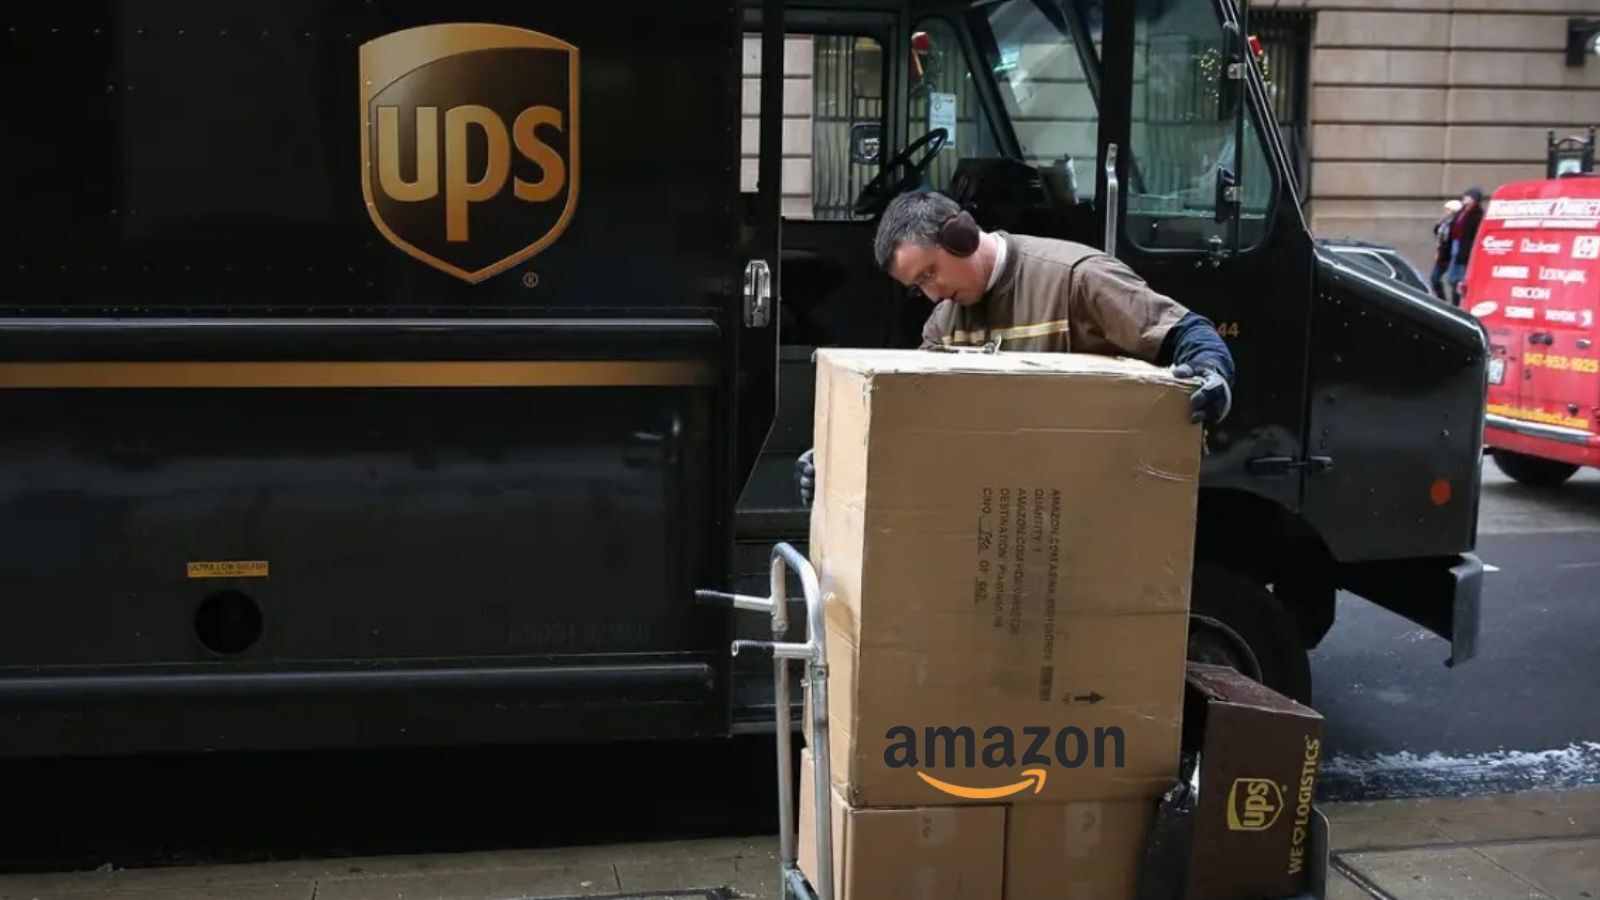 Does UPS Deliver Amazon Packages? (Yes, But Amazon Delivers Are More)